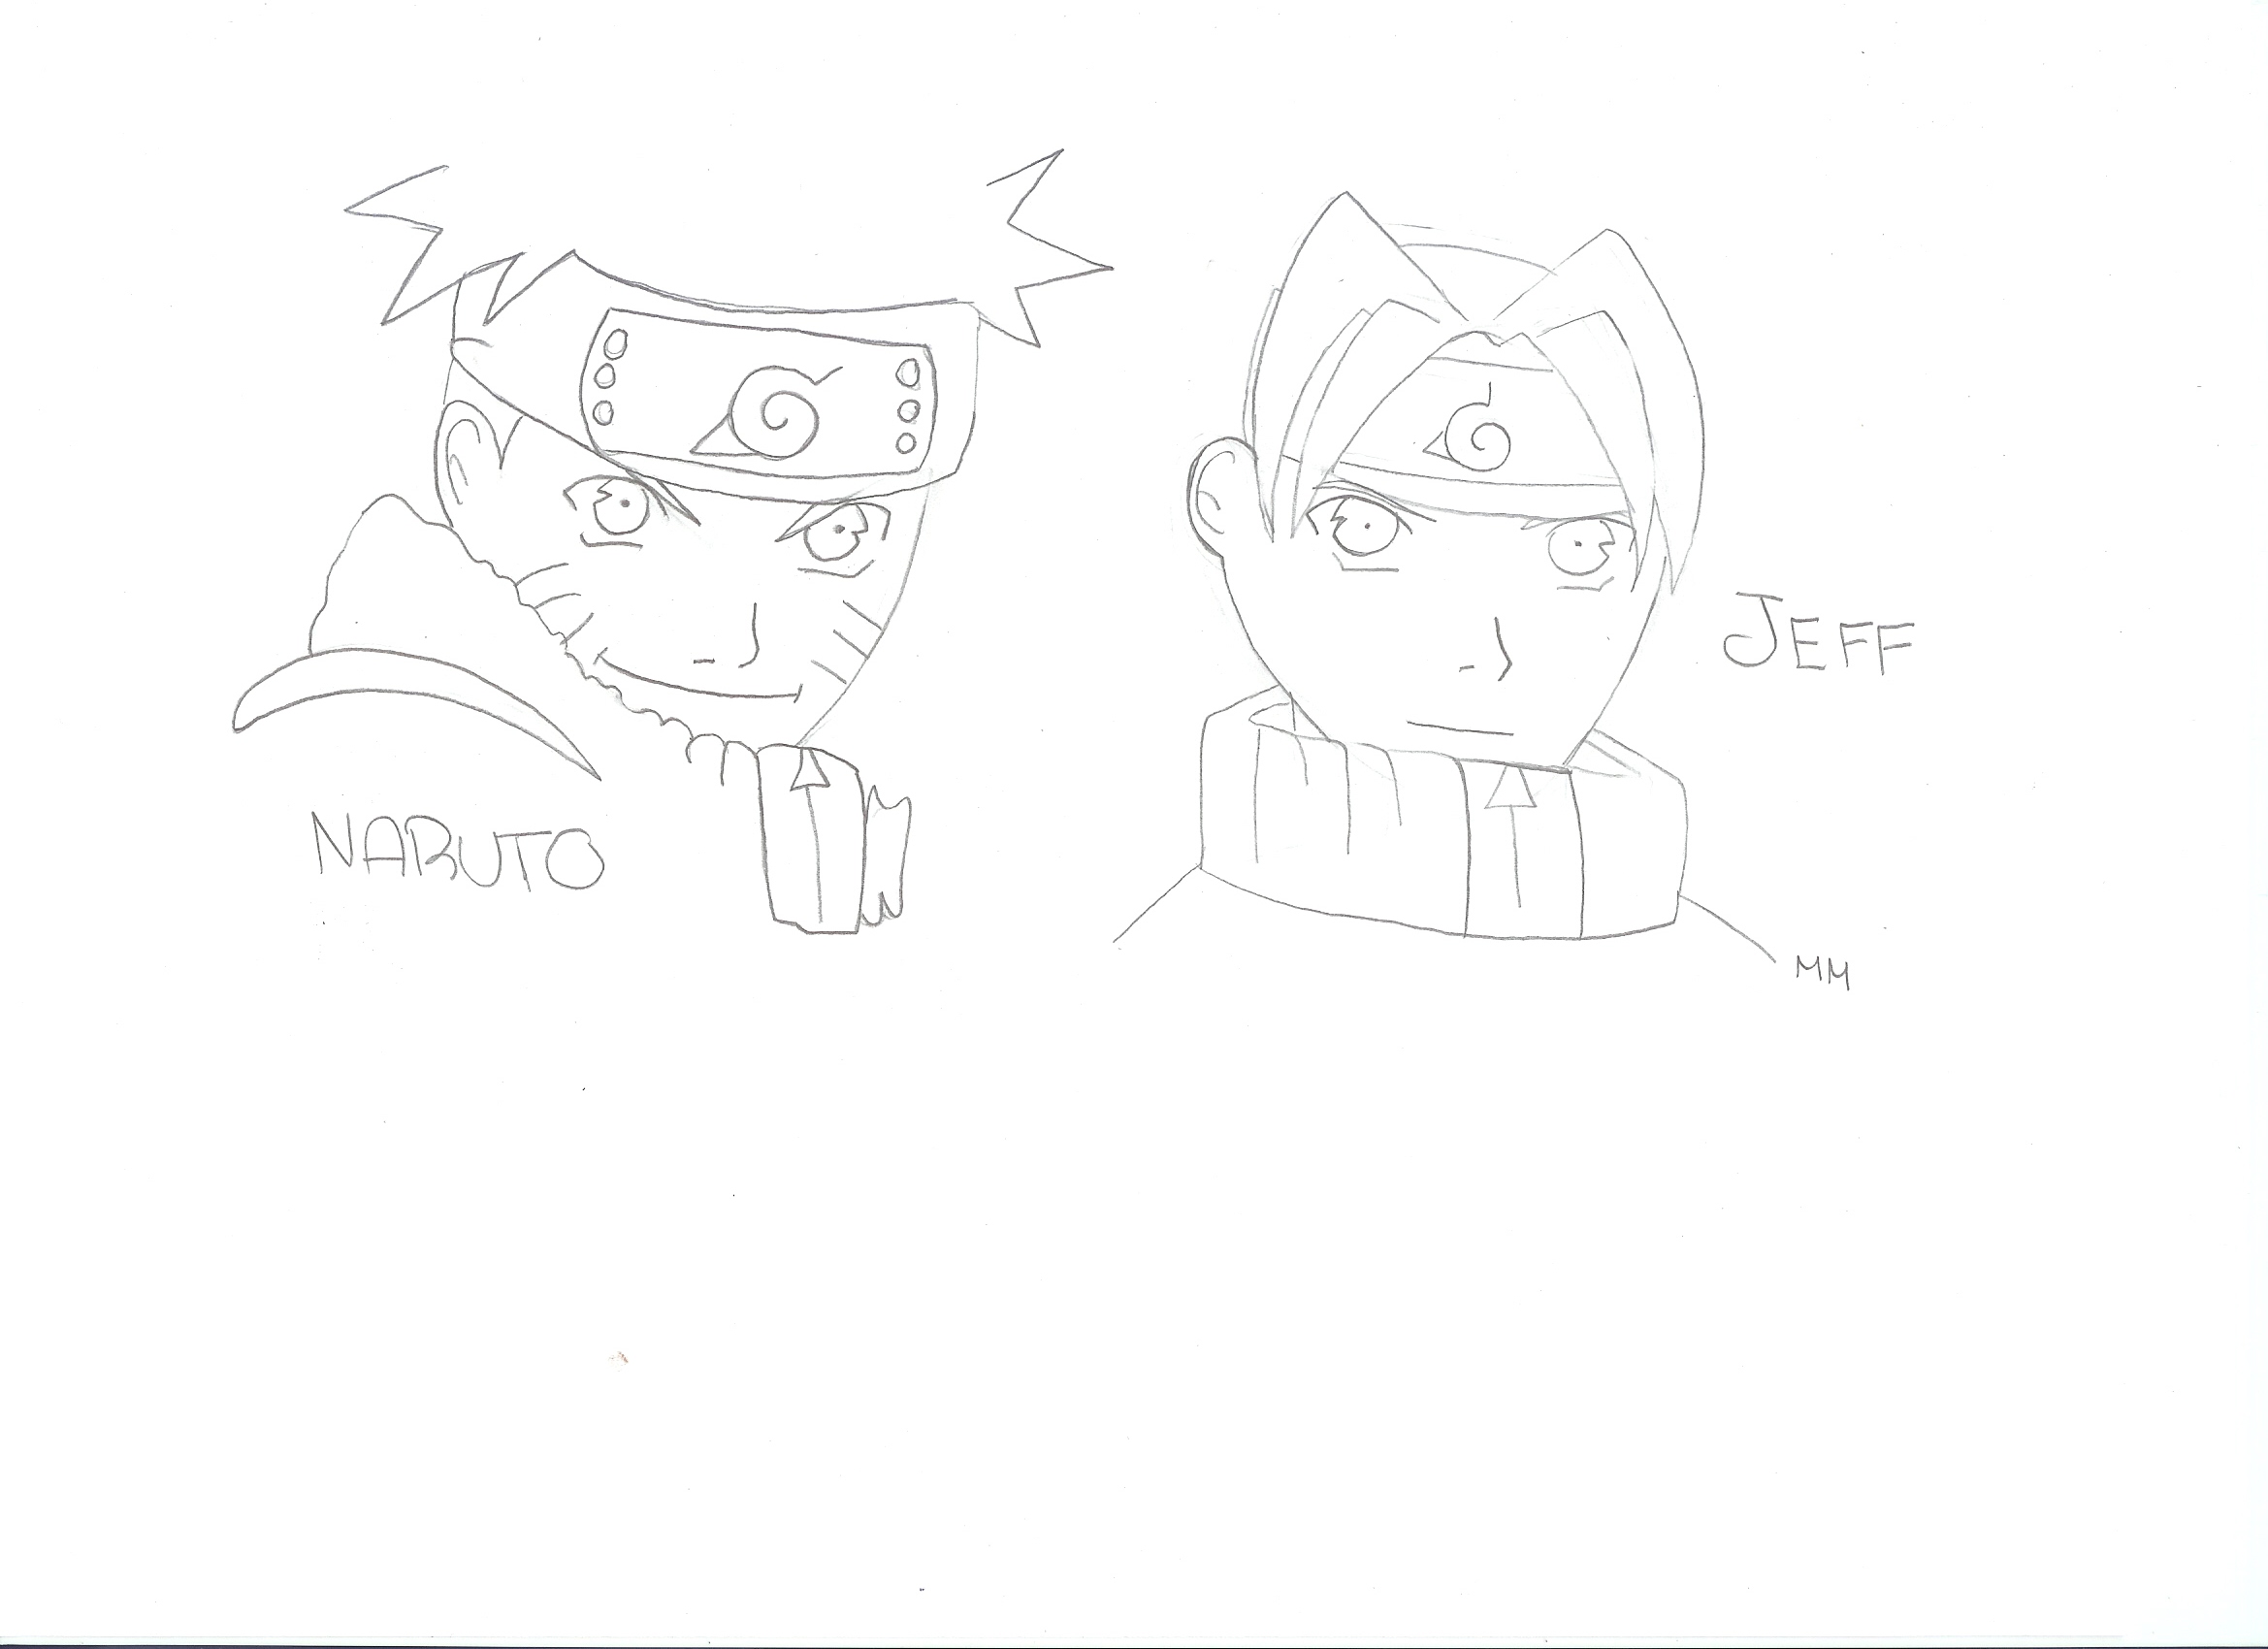 Naruto and Jeff (Requested) by InvaderAvatarTitan13